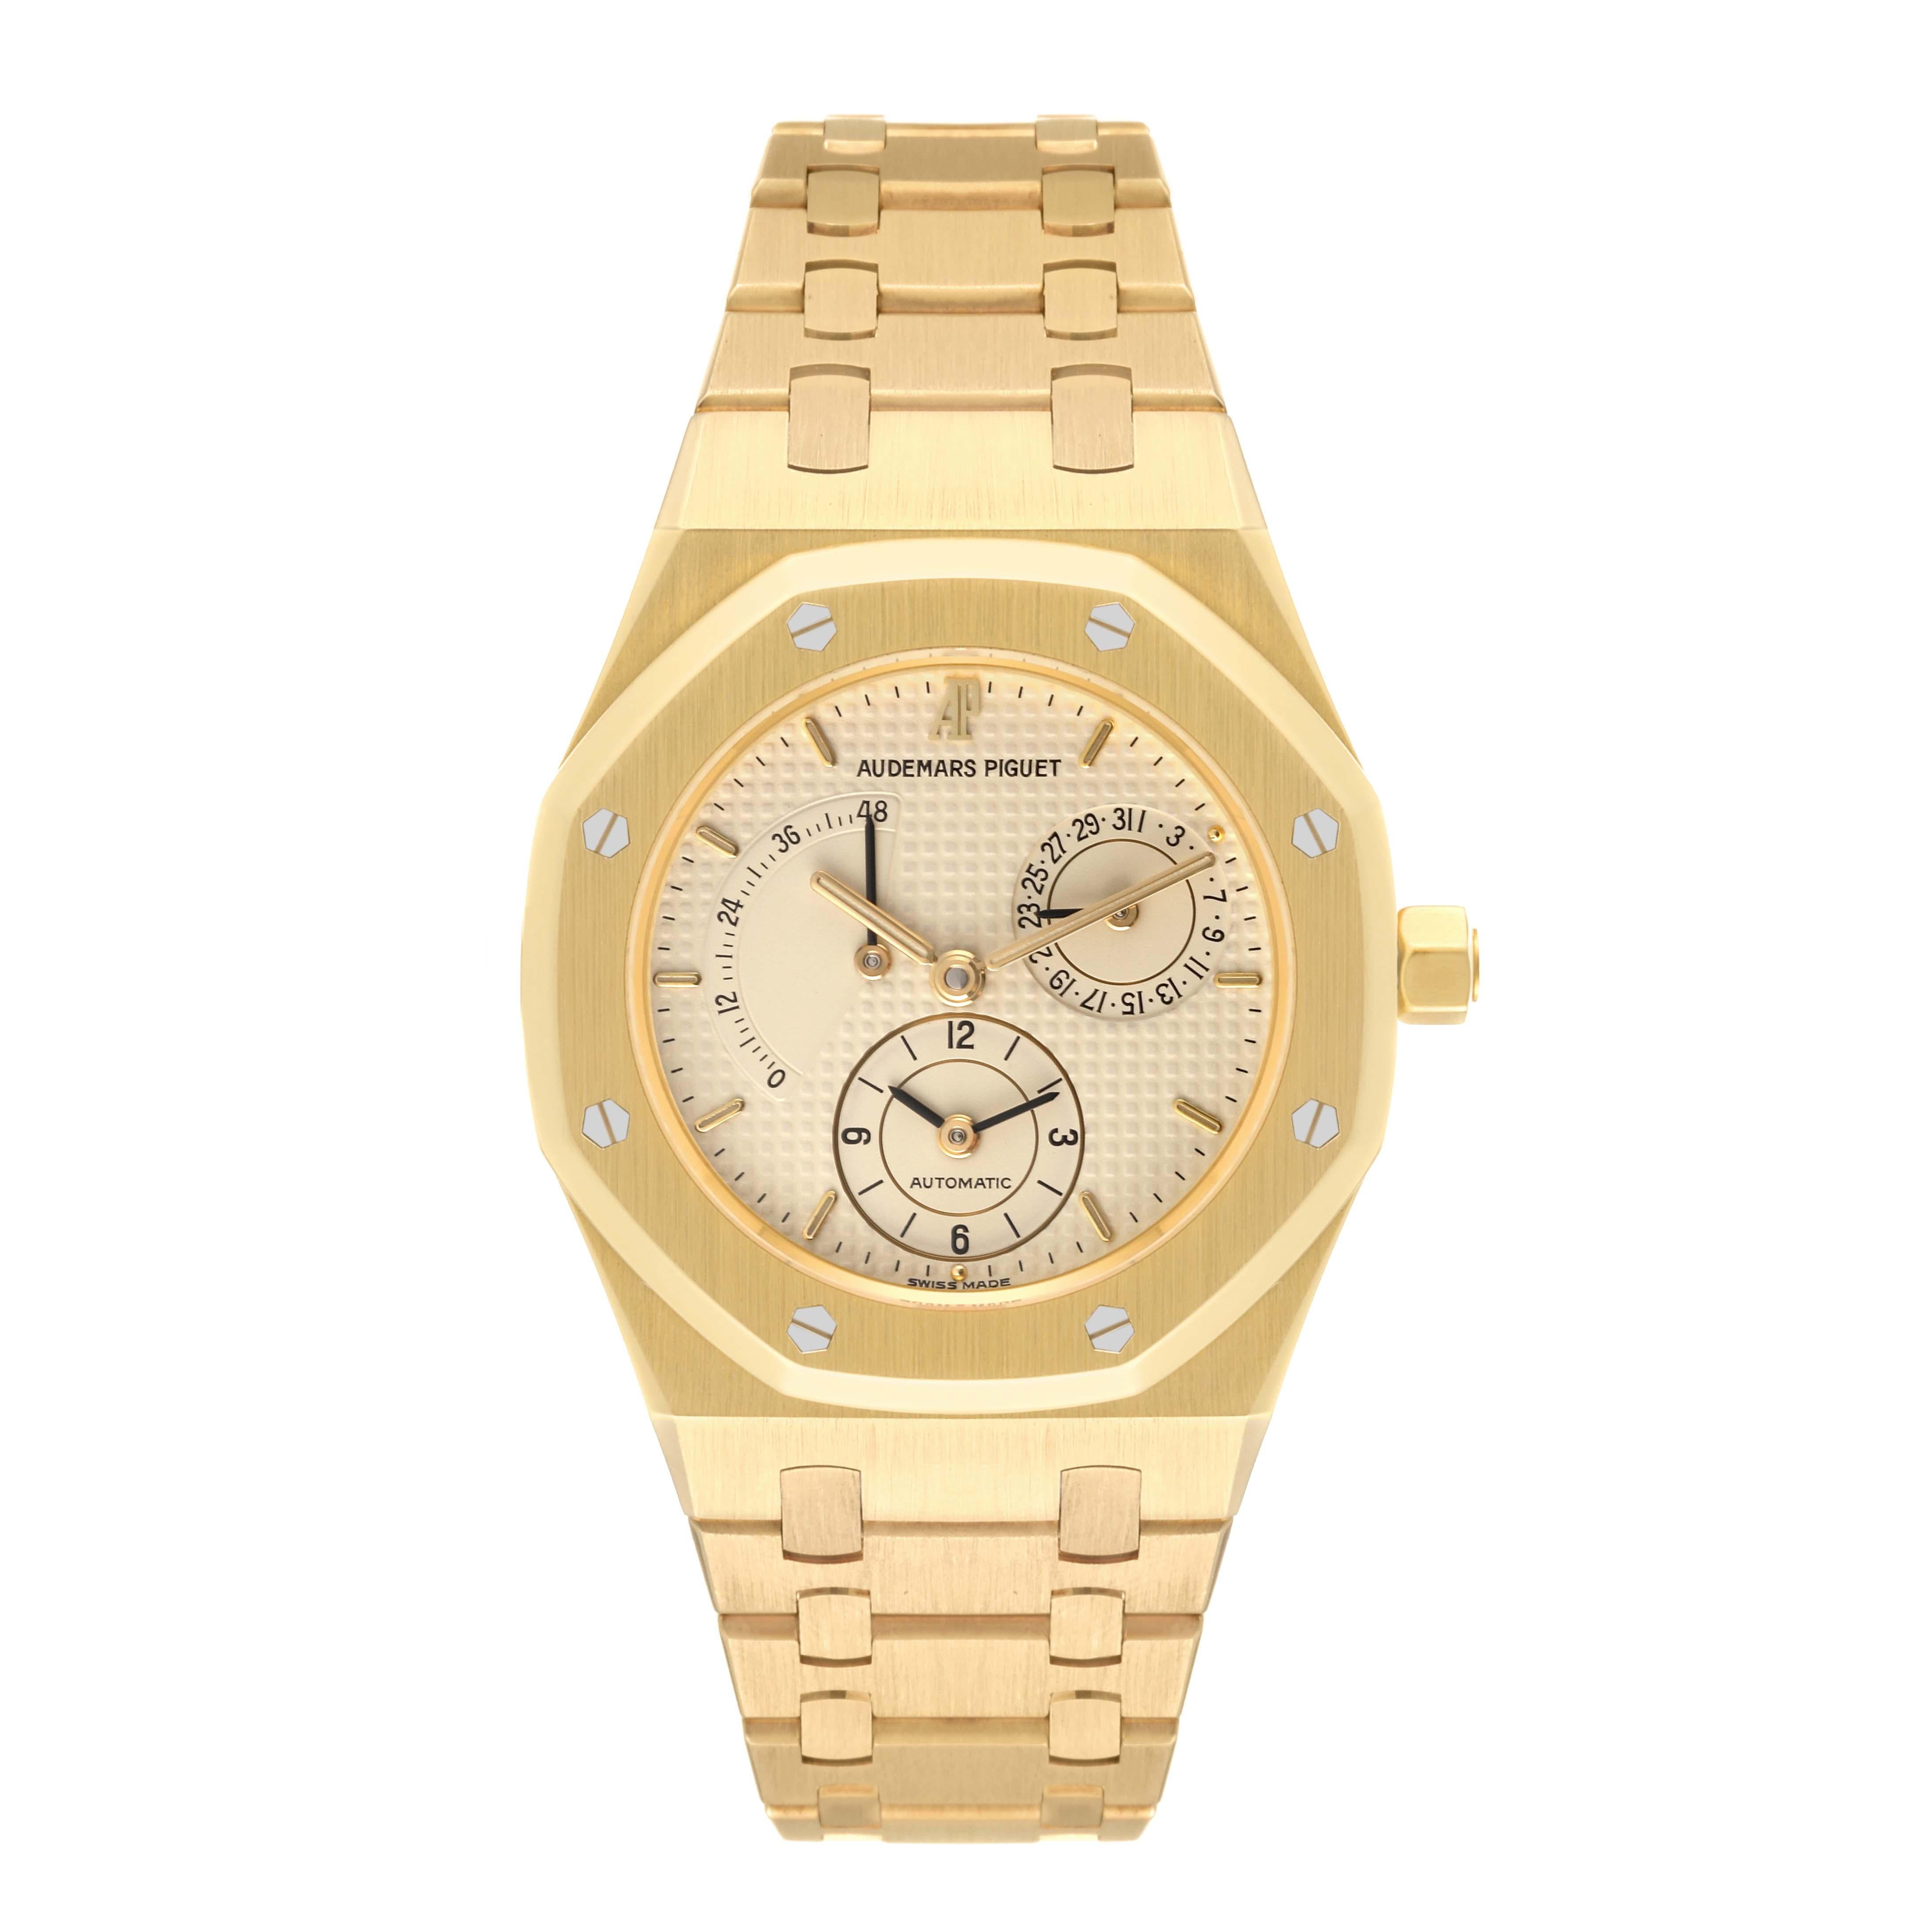 Audemars Piguet Royal Oak Dual Time Yellow Gold Mens Watch 25730BA. Automatic self-winding movement. 18K yellow gold hexagonal case 36.0 mm in diameter. 18K yellow gold bezel punctuated with 8 signature screws. Scratch resistant sapphire crystal.